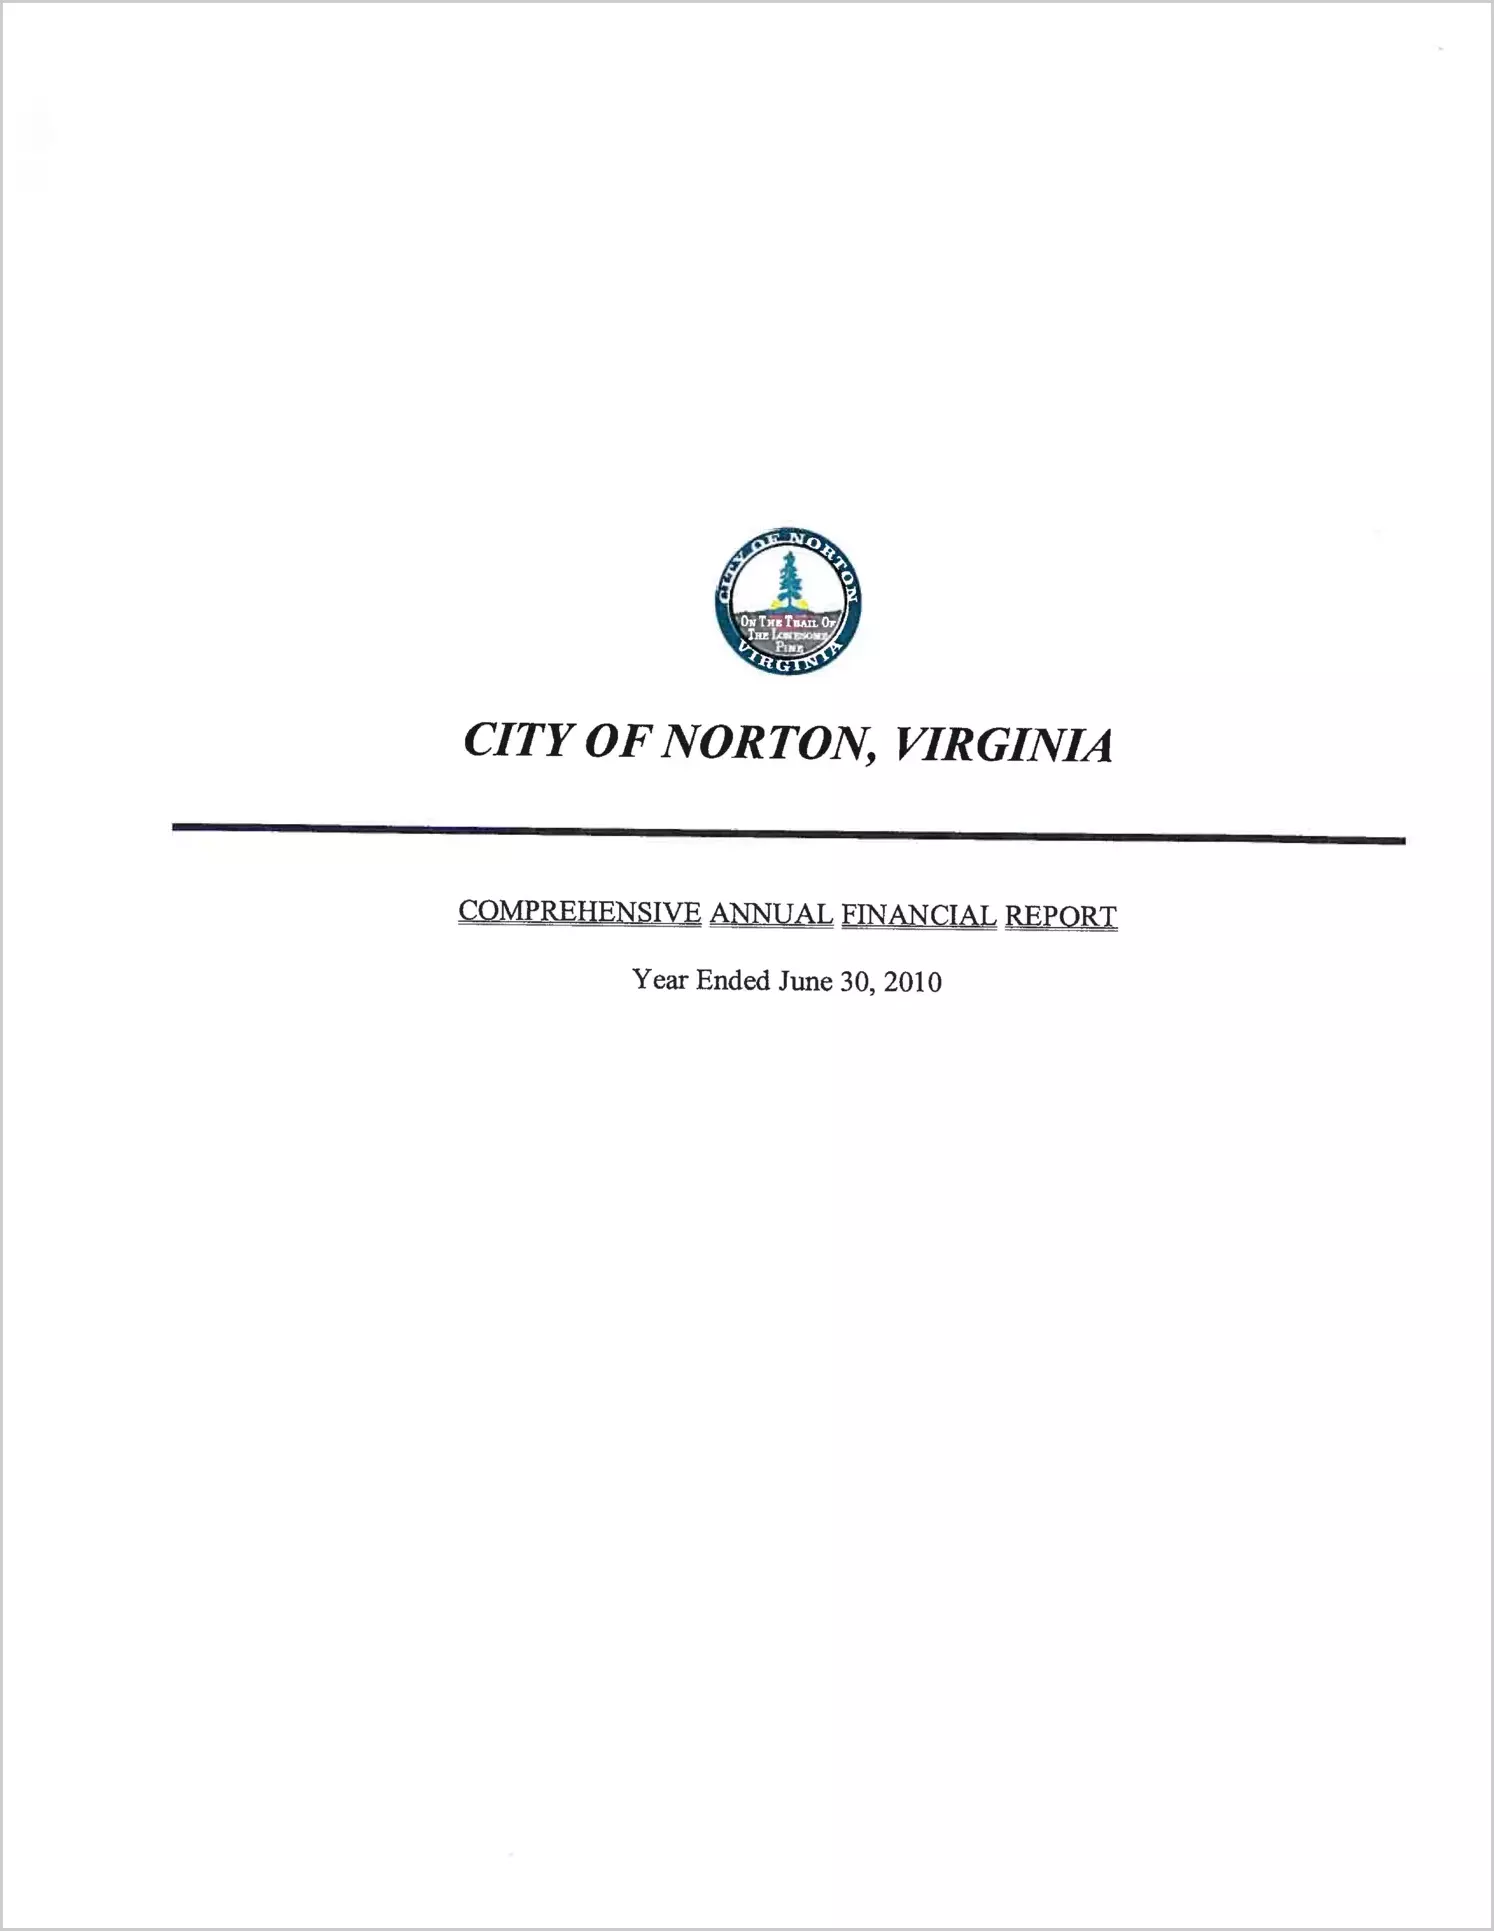 2010 Annual Financial Report for City of Norton